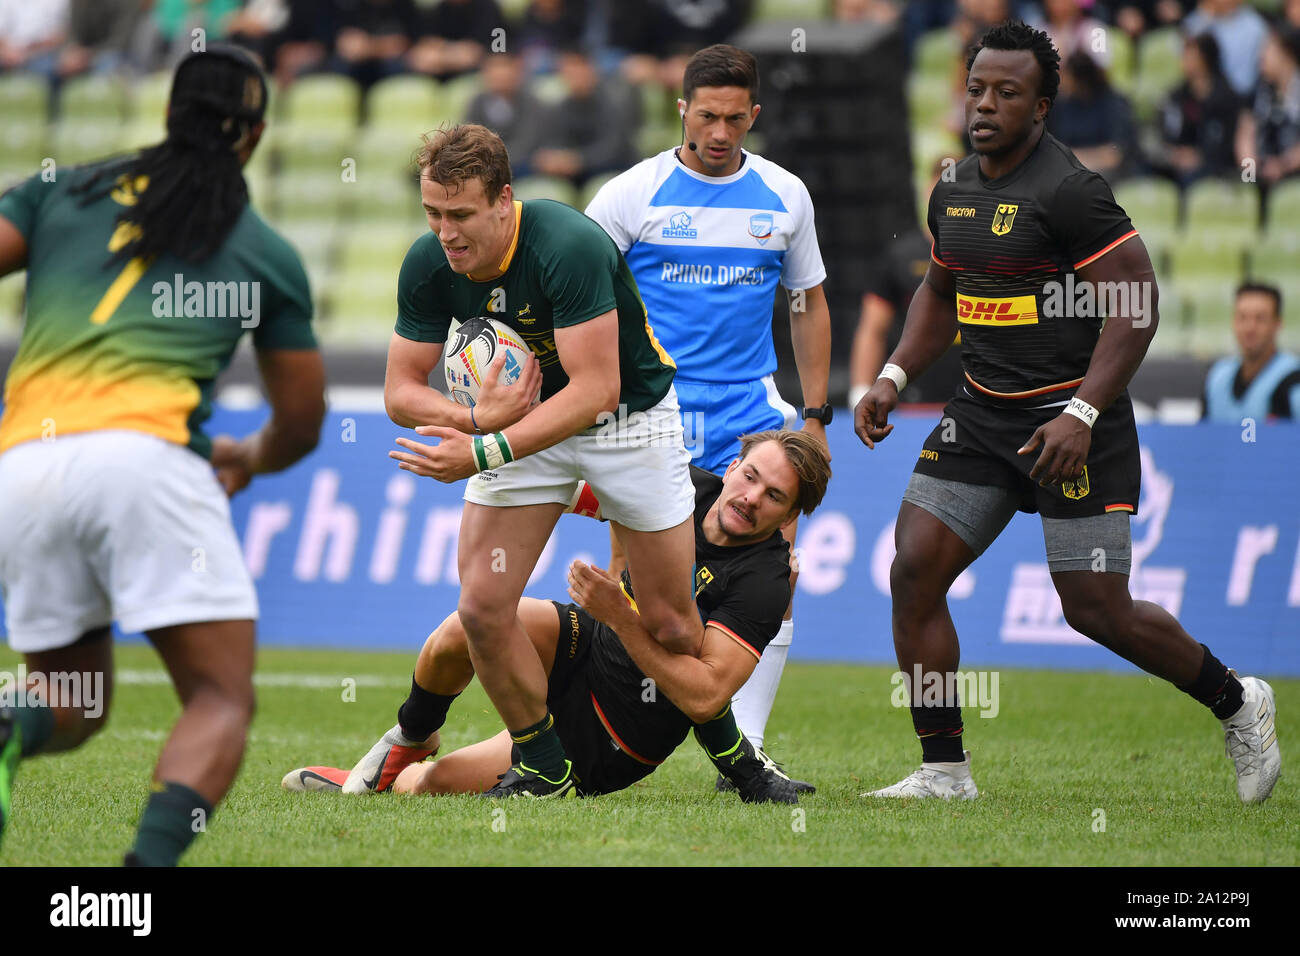 Munich, Deutschland. 22nd Sep, 2019. Action duels.Spielszene. South-Germany. Rugby Oktoberfest 7s, invitation tournament of the national teams in the Siebener Rugby, on 22.09.2019 in Munich, Olympic Stadium. | usage worldwide Credit: dpa/Alamy Live News Stock Photo